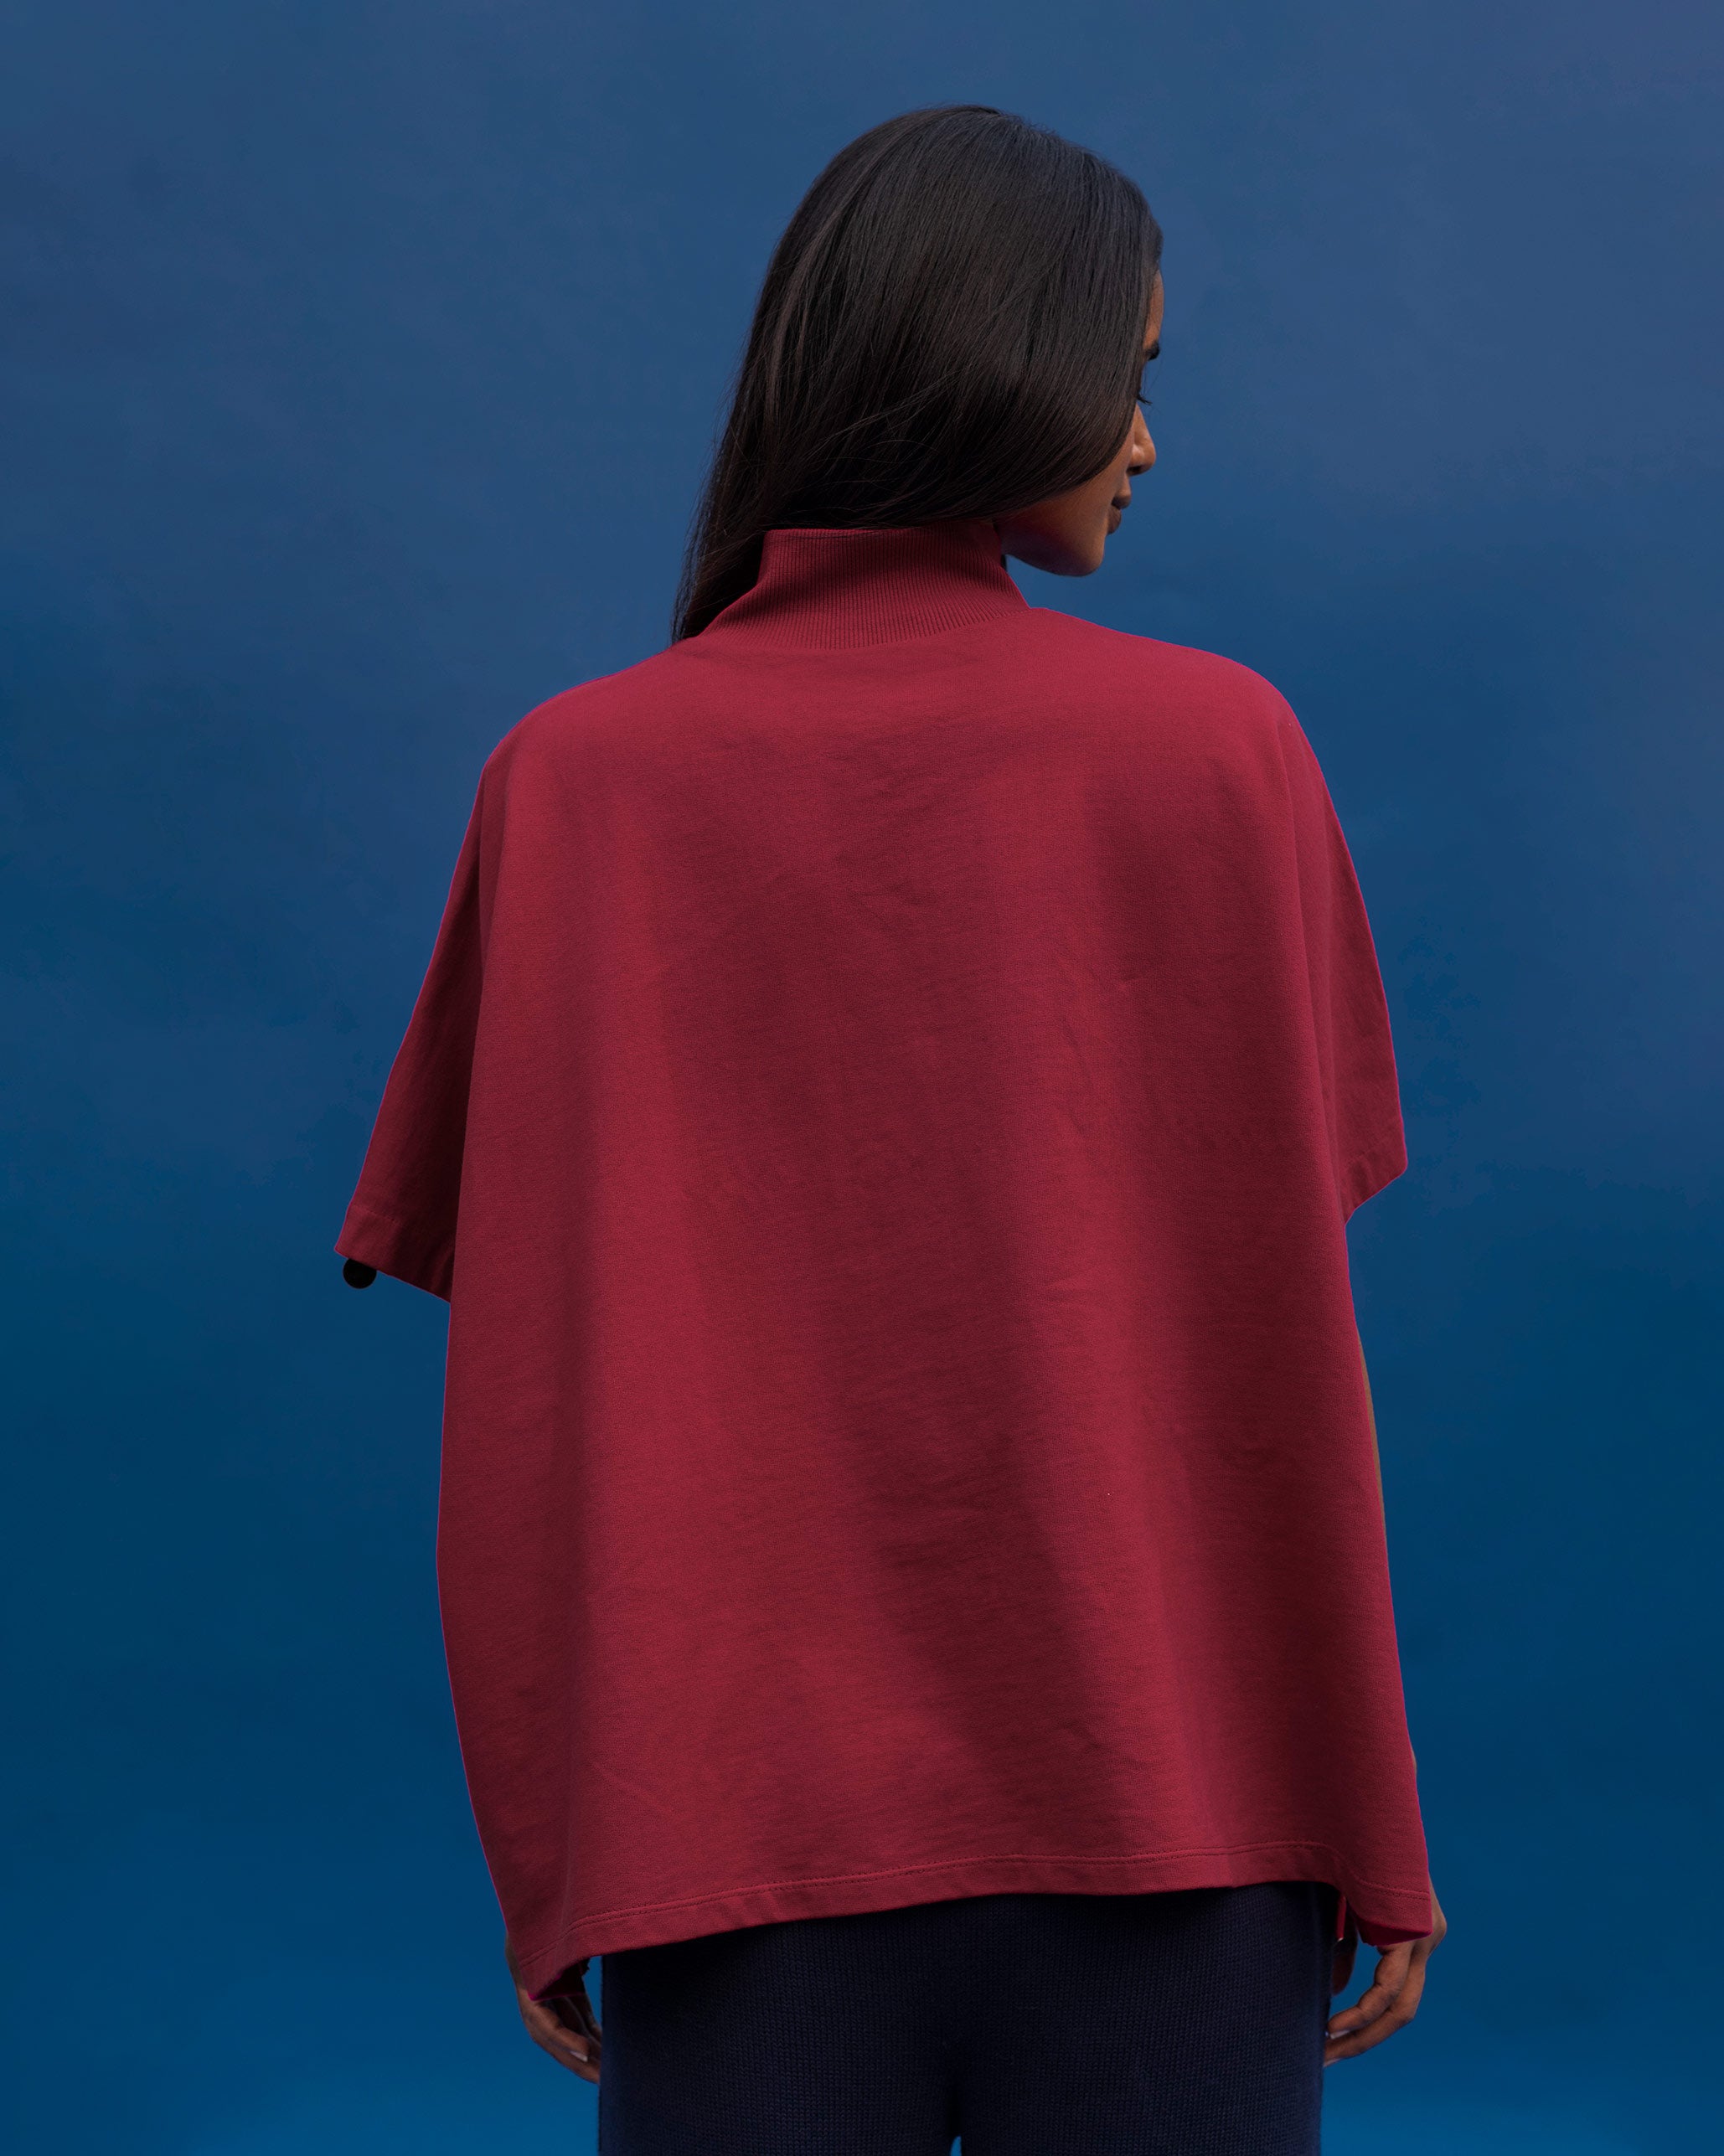 Waterfall Cape - Red